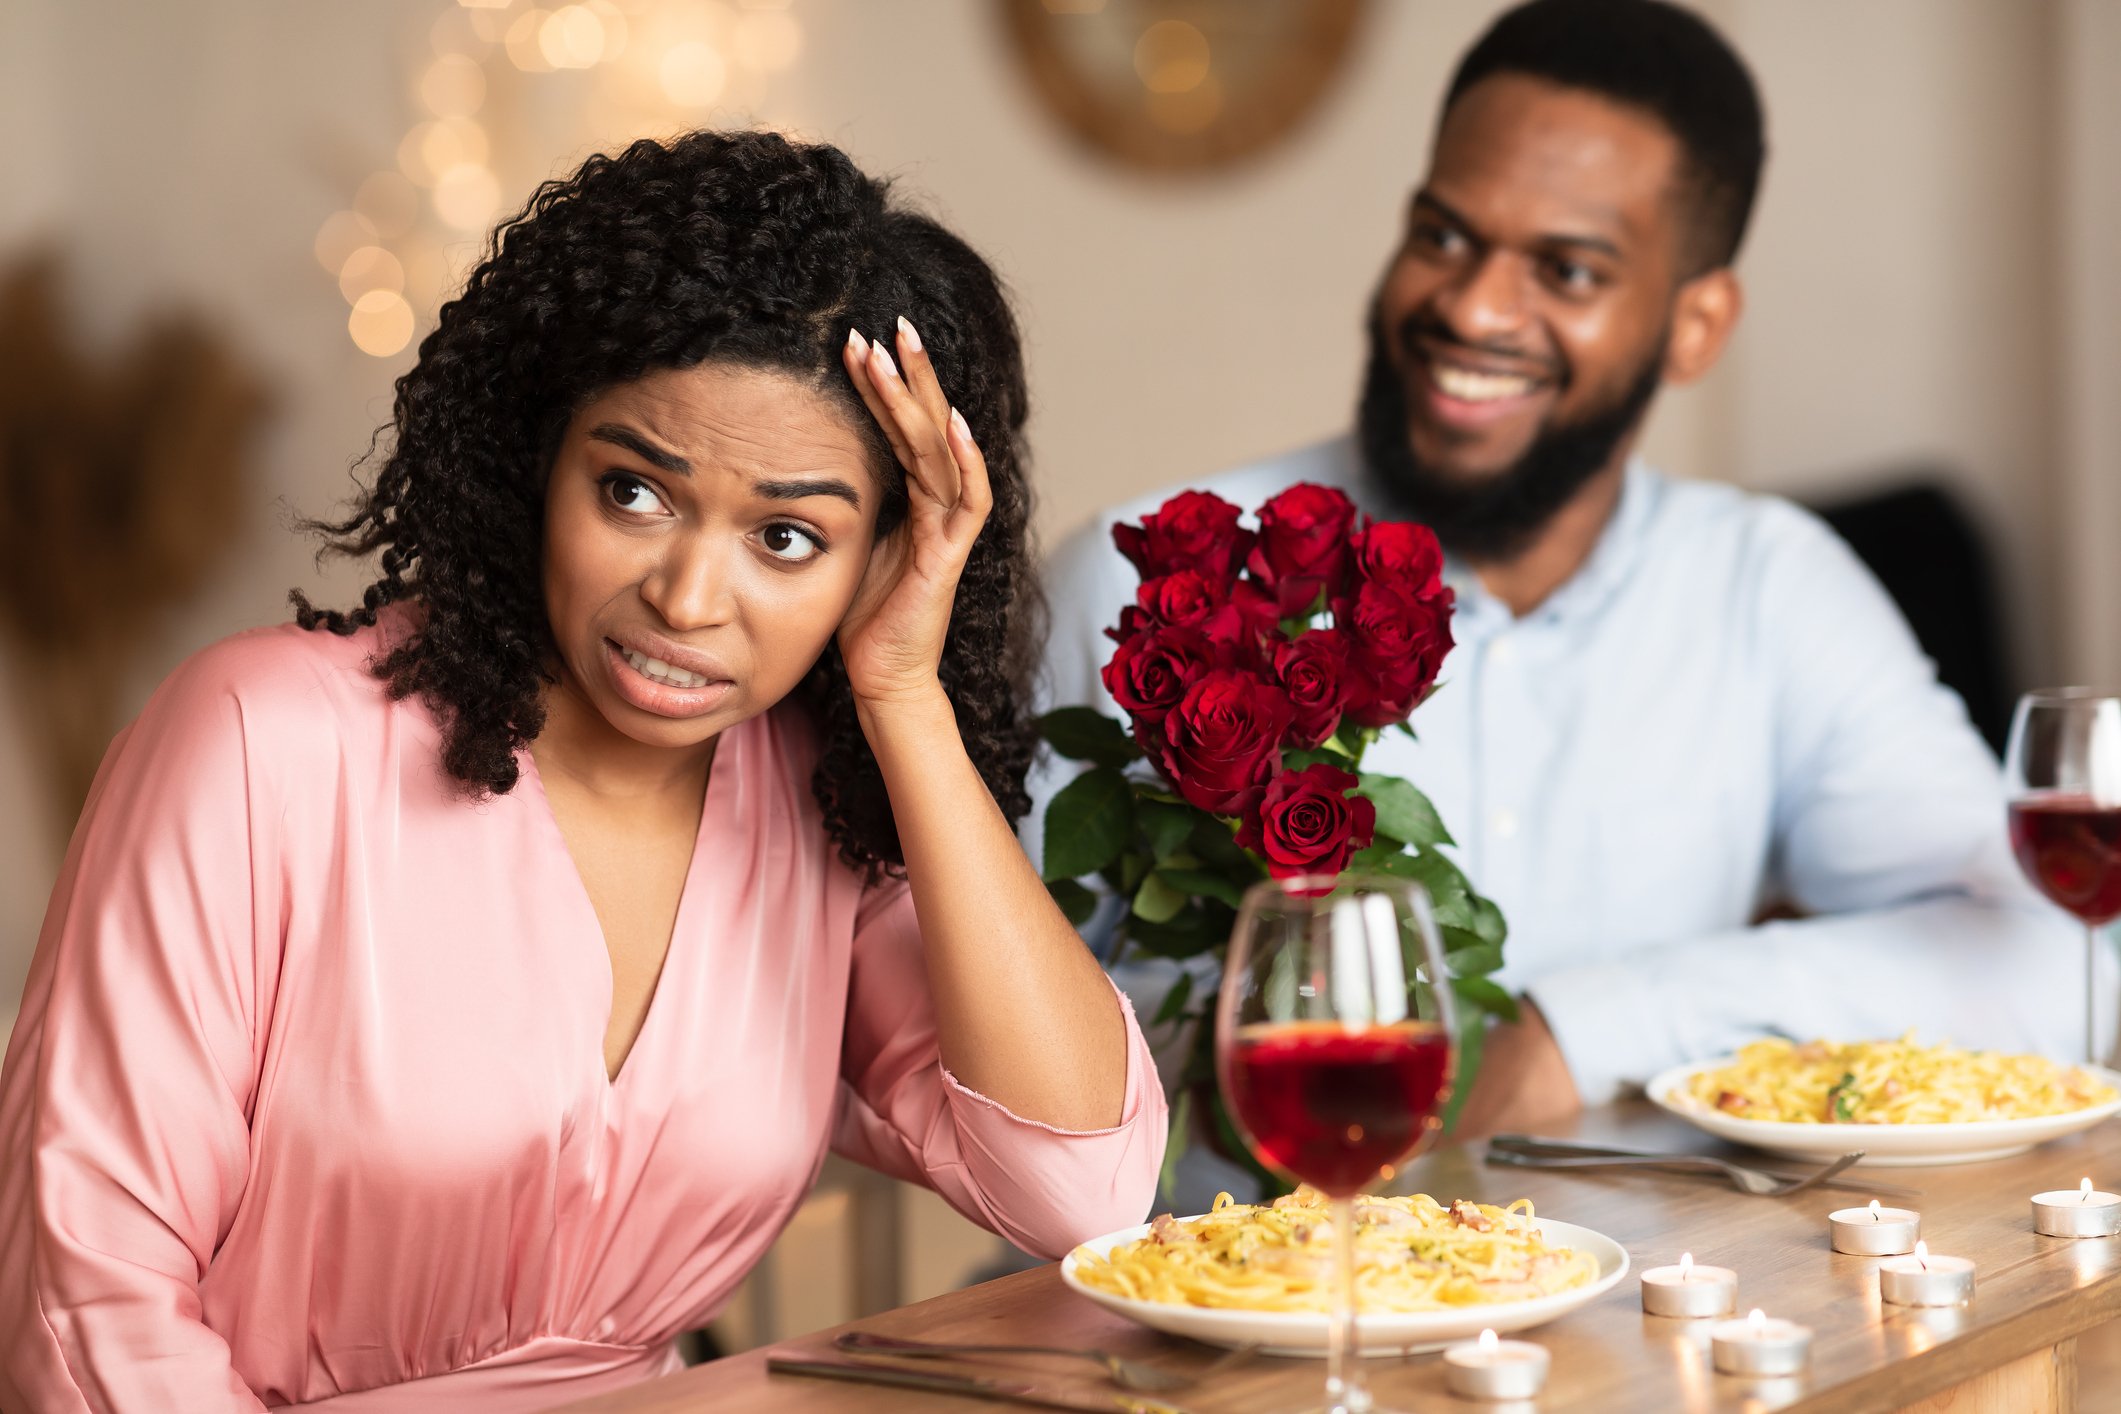 Woman appears uncomfortable on date with amused man, bouquet on table, restaurant setting